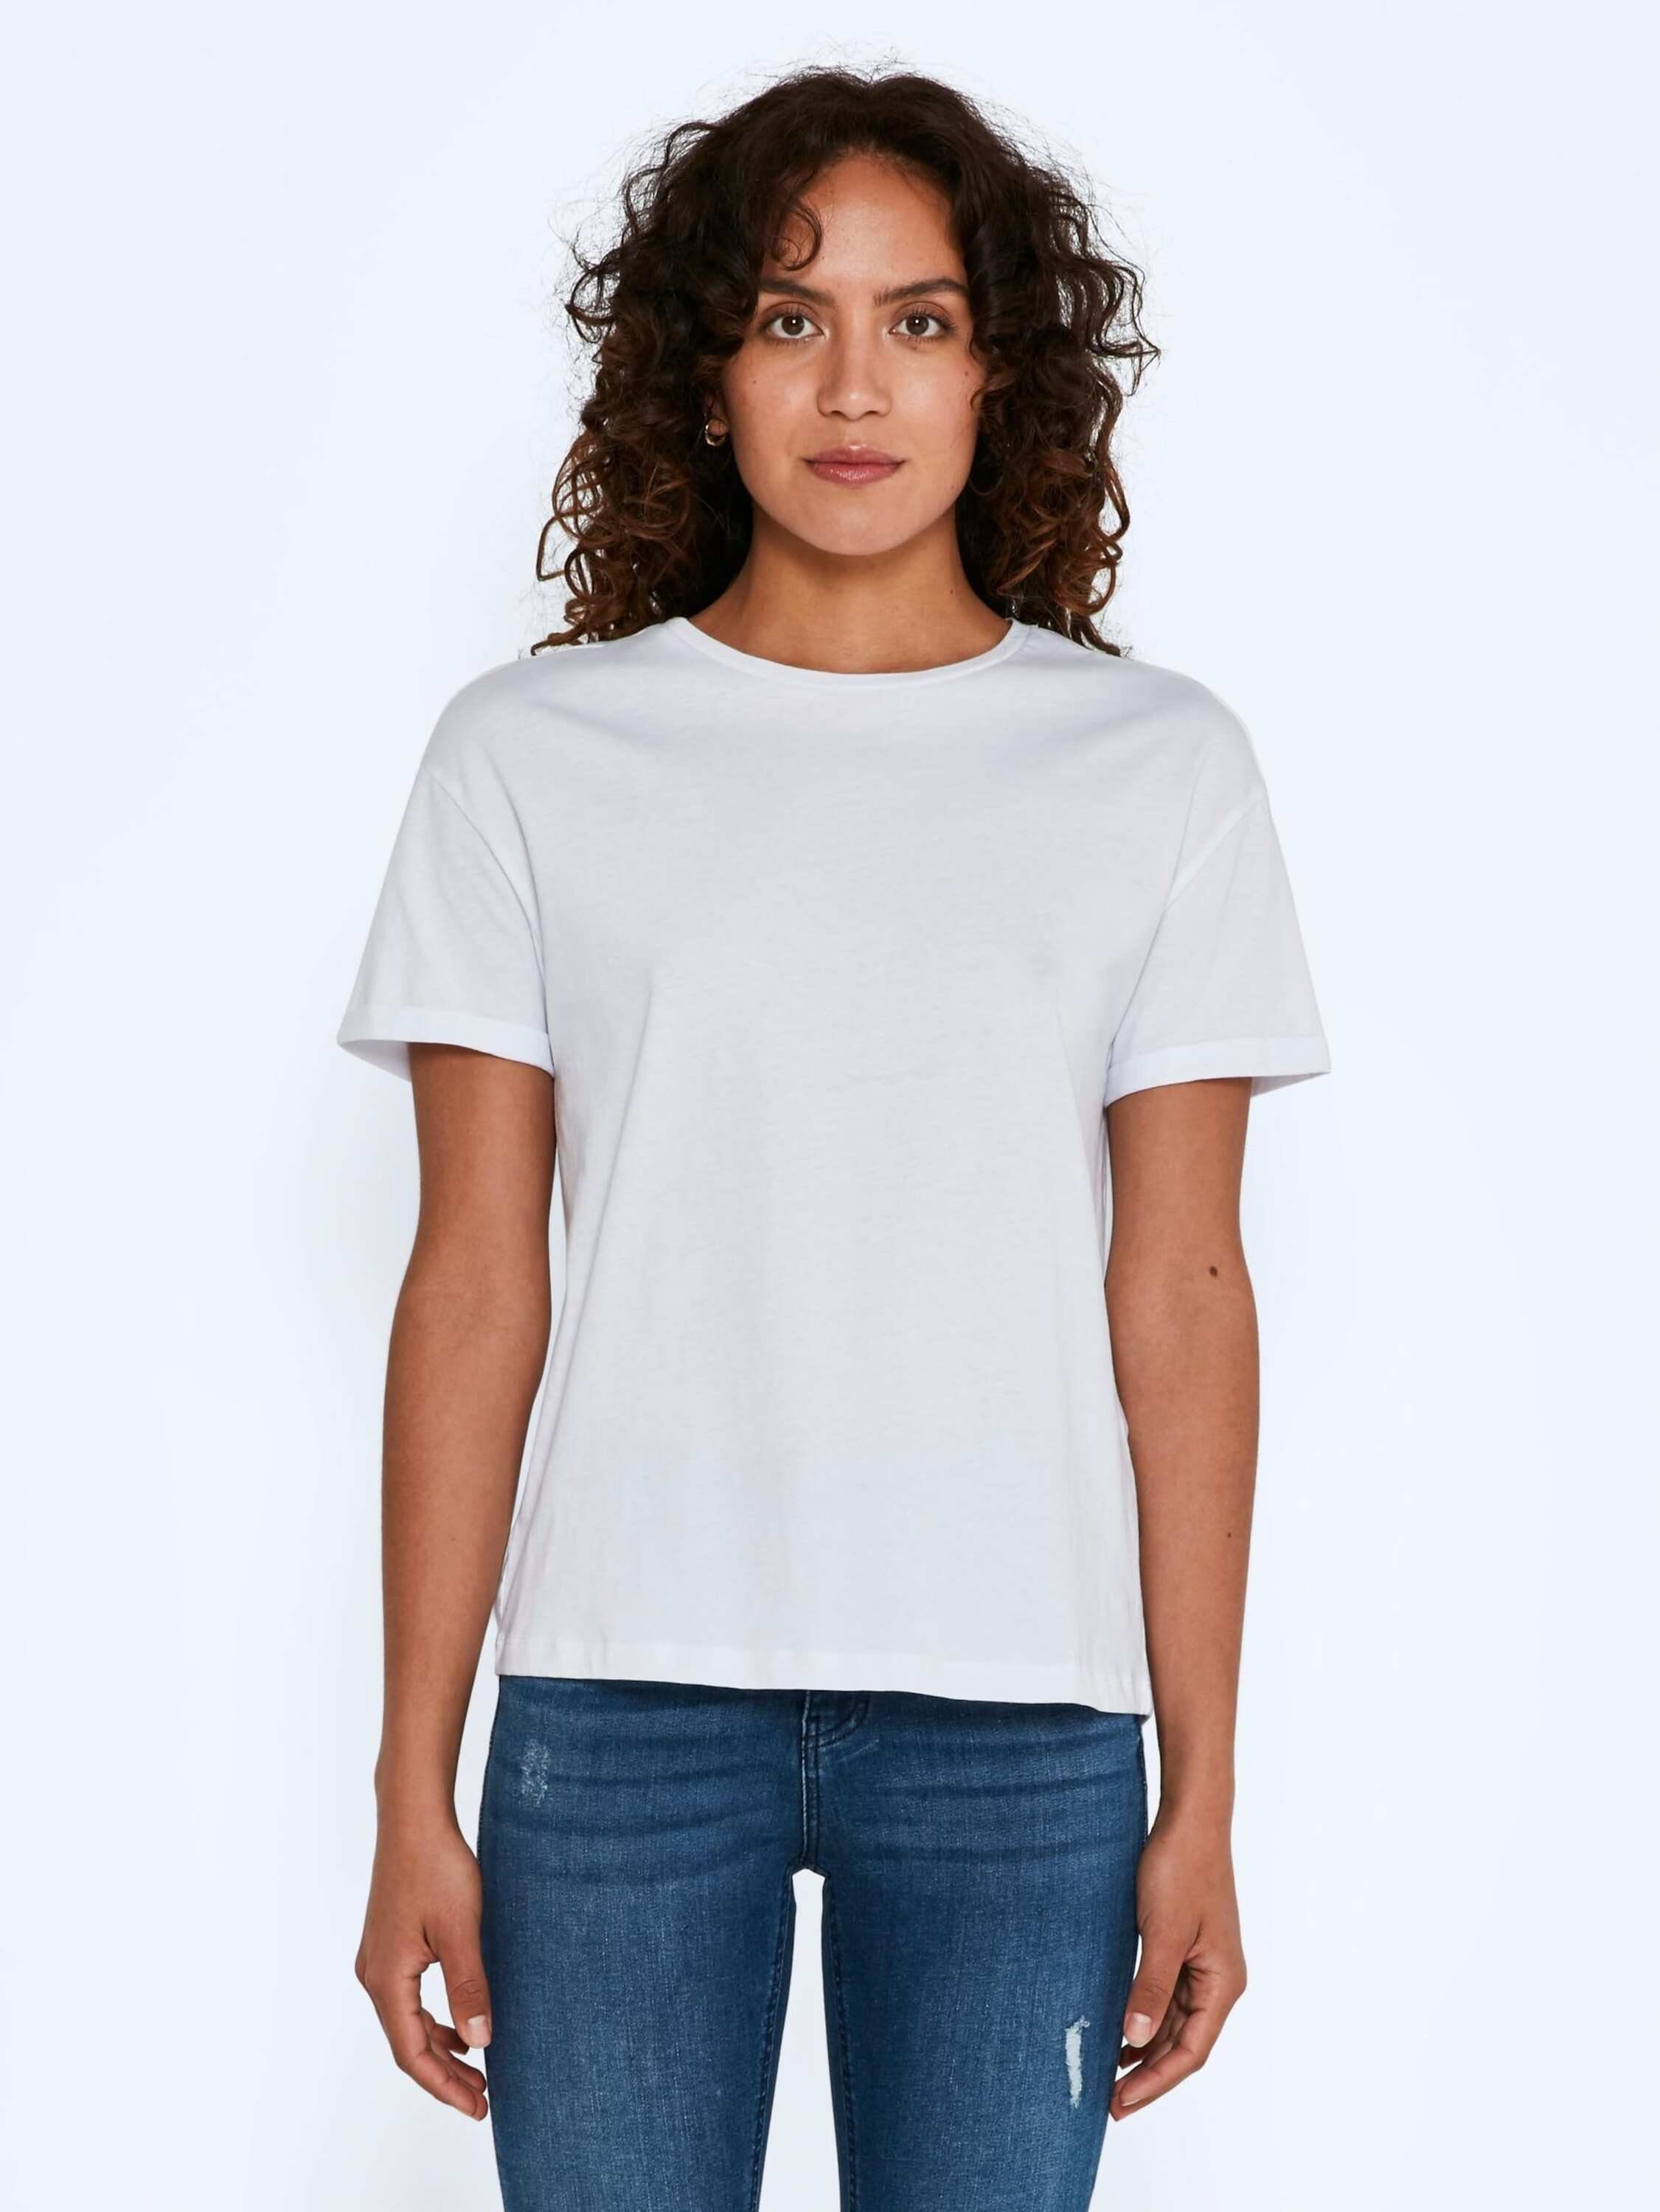 Details, (1-tlg) Detail may Plain/ohne Weiteres White T-Shirt Noisy Bright Brandy